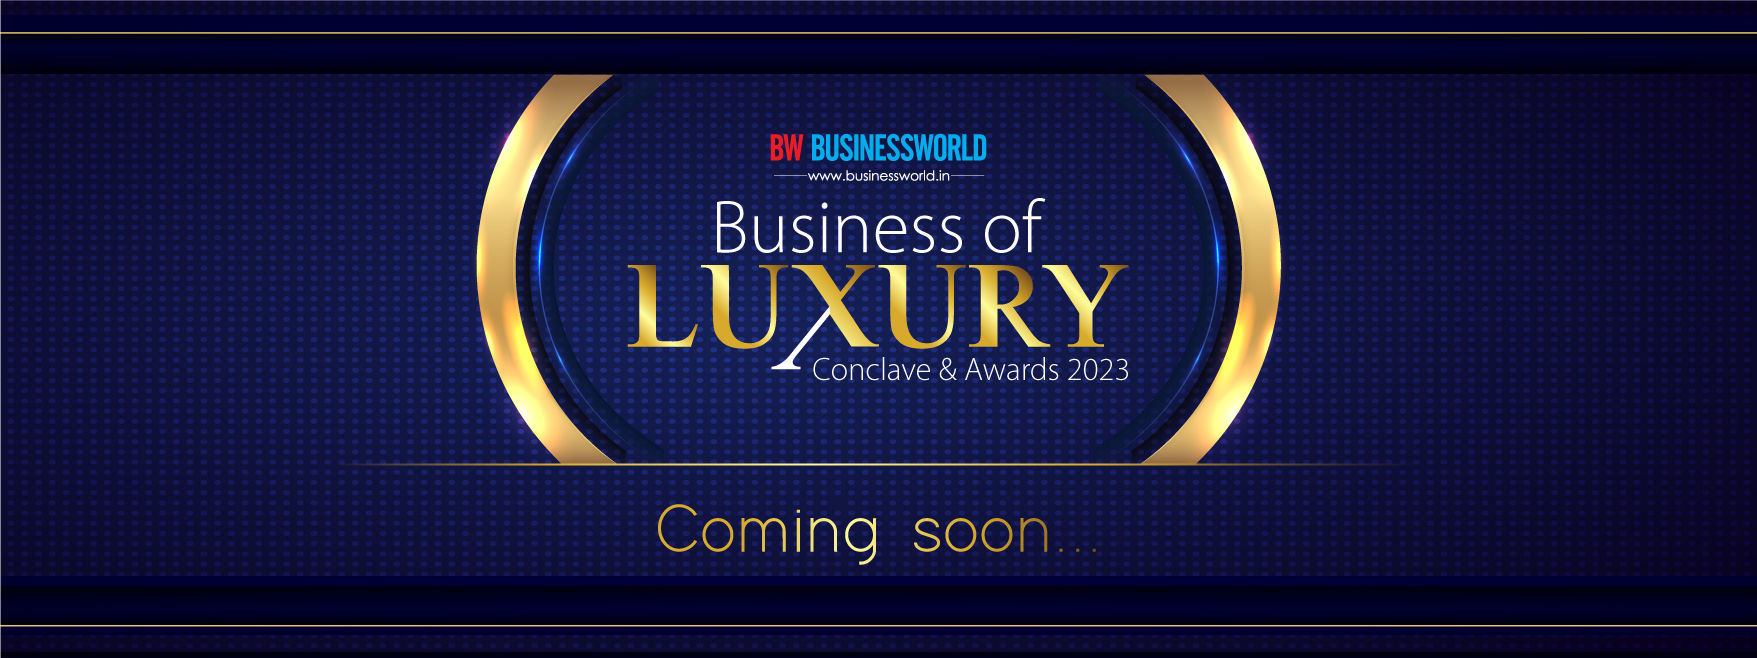 The Business of Luxury Conclave